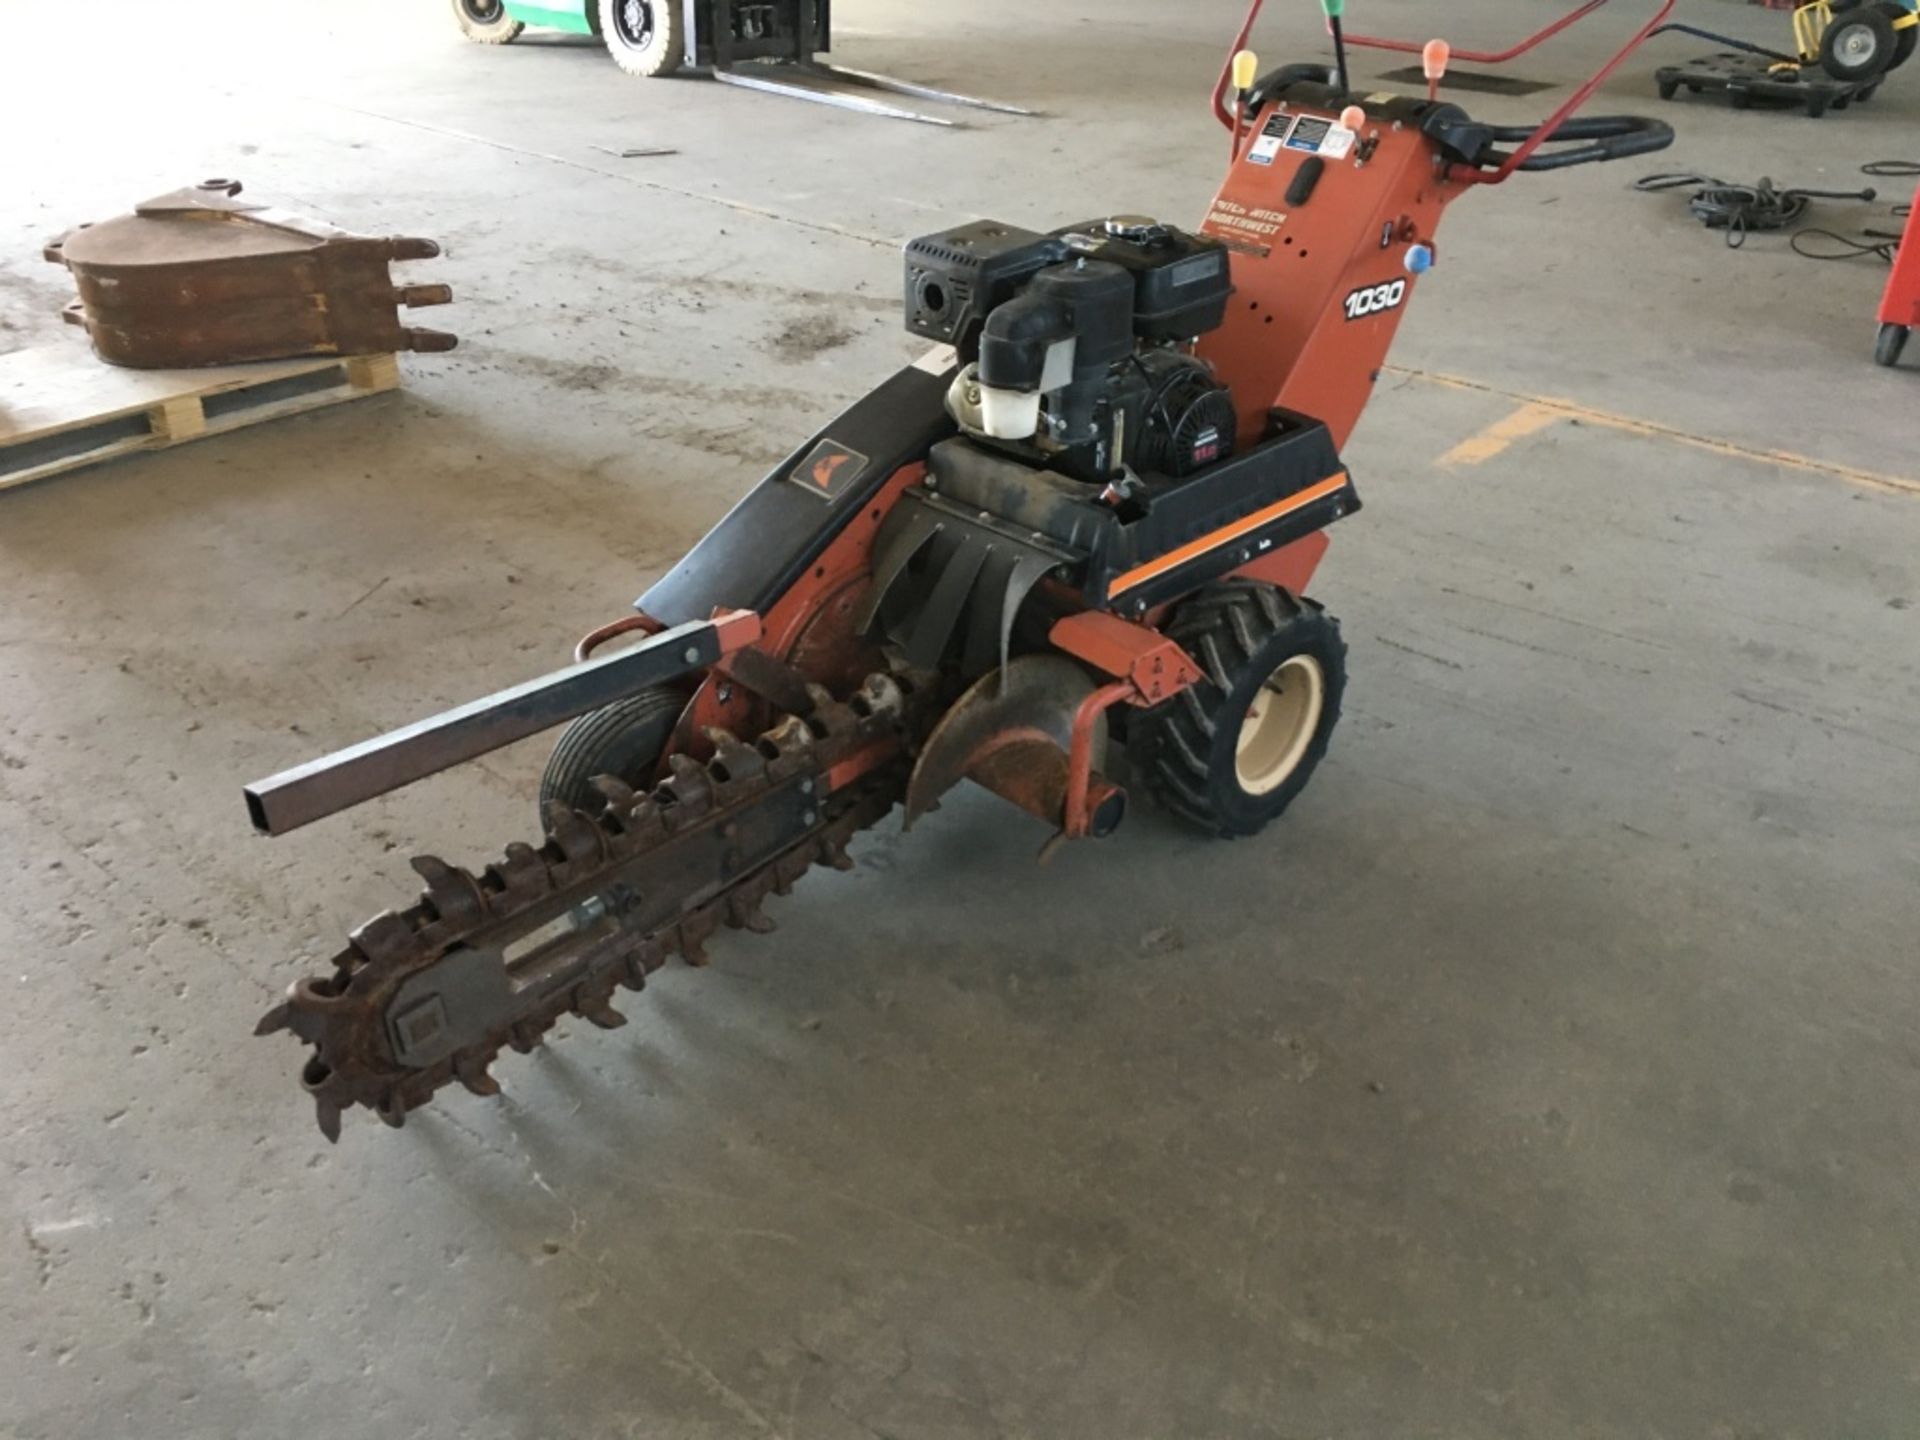 2005 Ditch Witch 1030 Walk Behind Trencher - Image 5 of 19